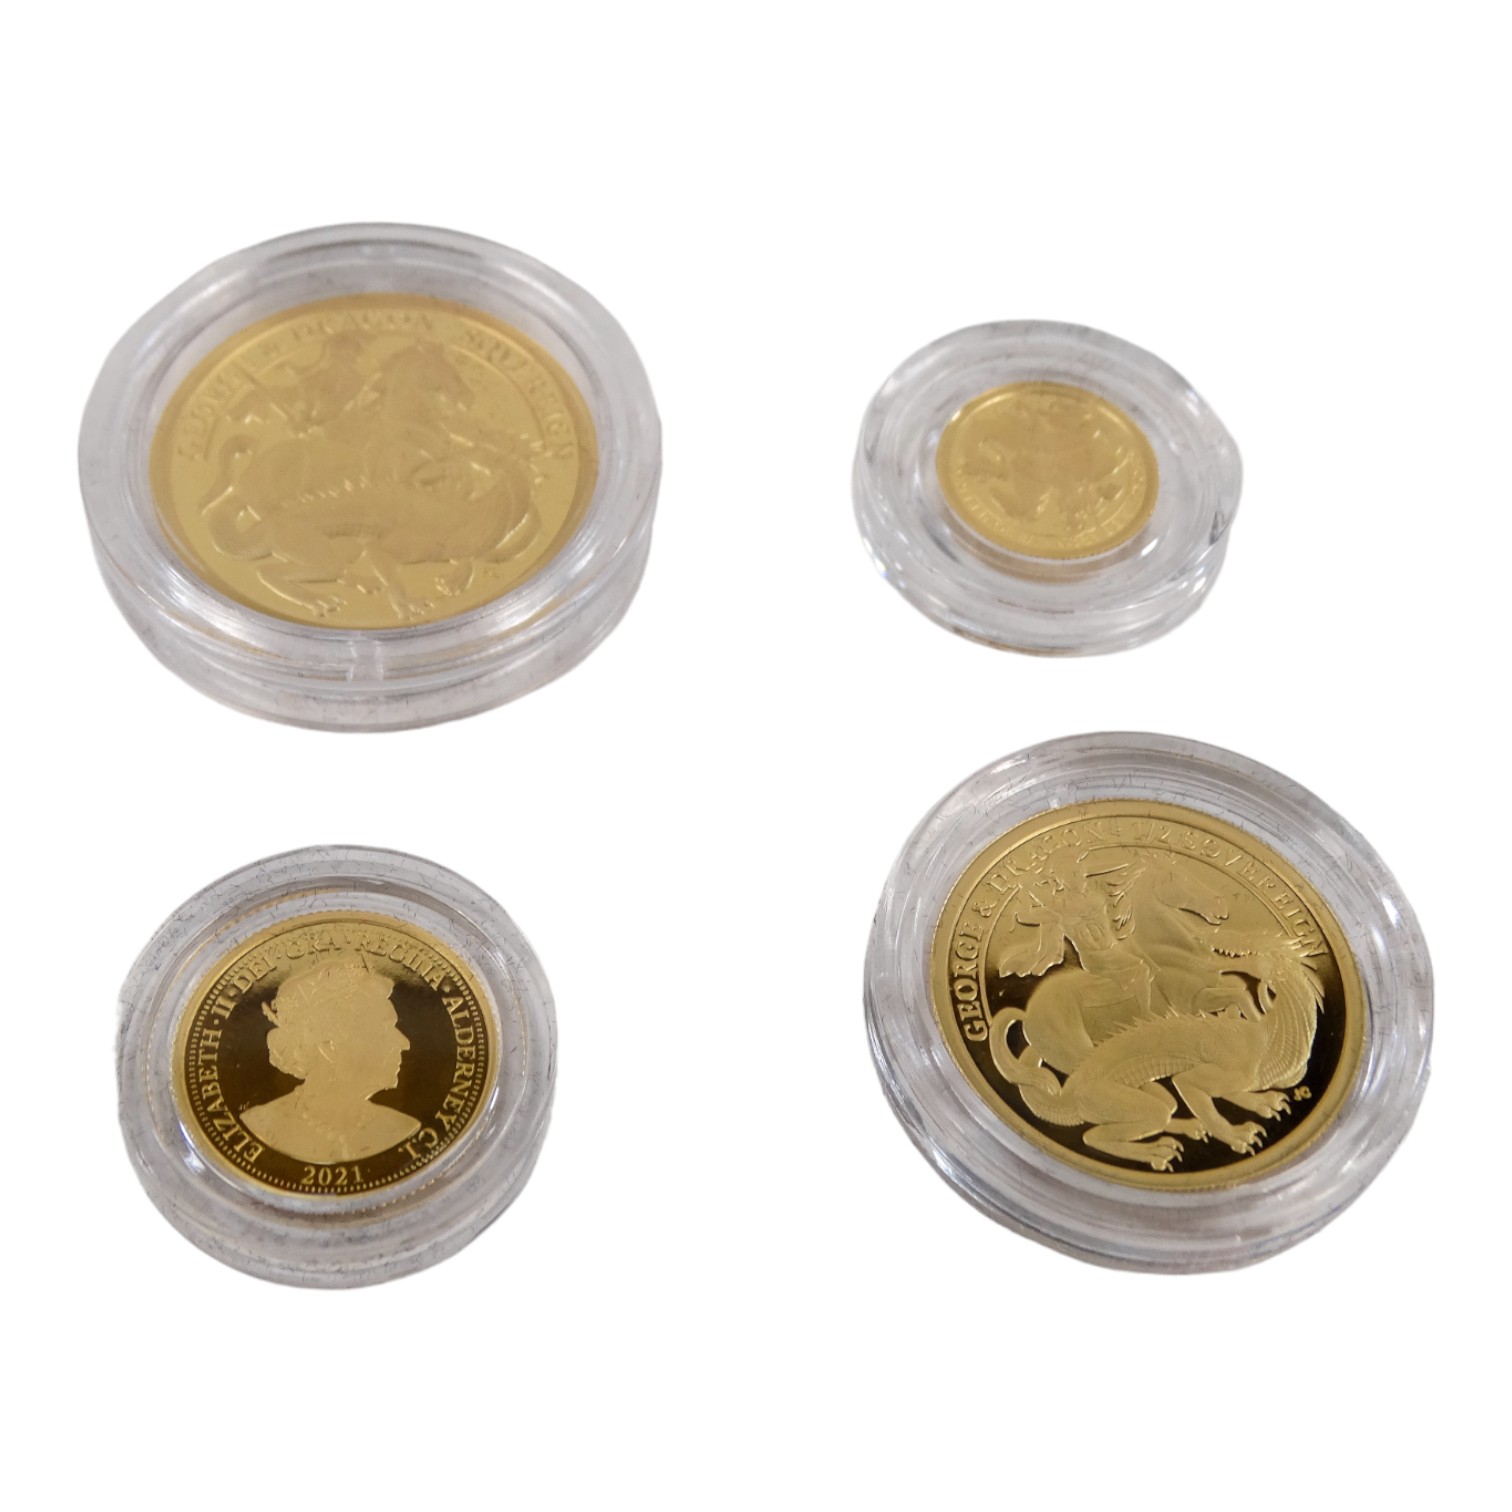 Hattons of London commemorative set of gold coins - 2021 200th anniversary, comprising sovereign, - Image 3 of 4